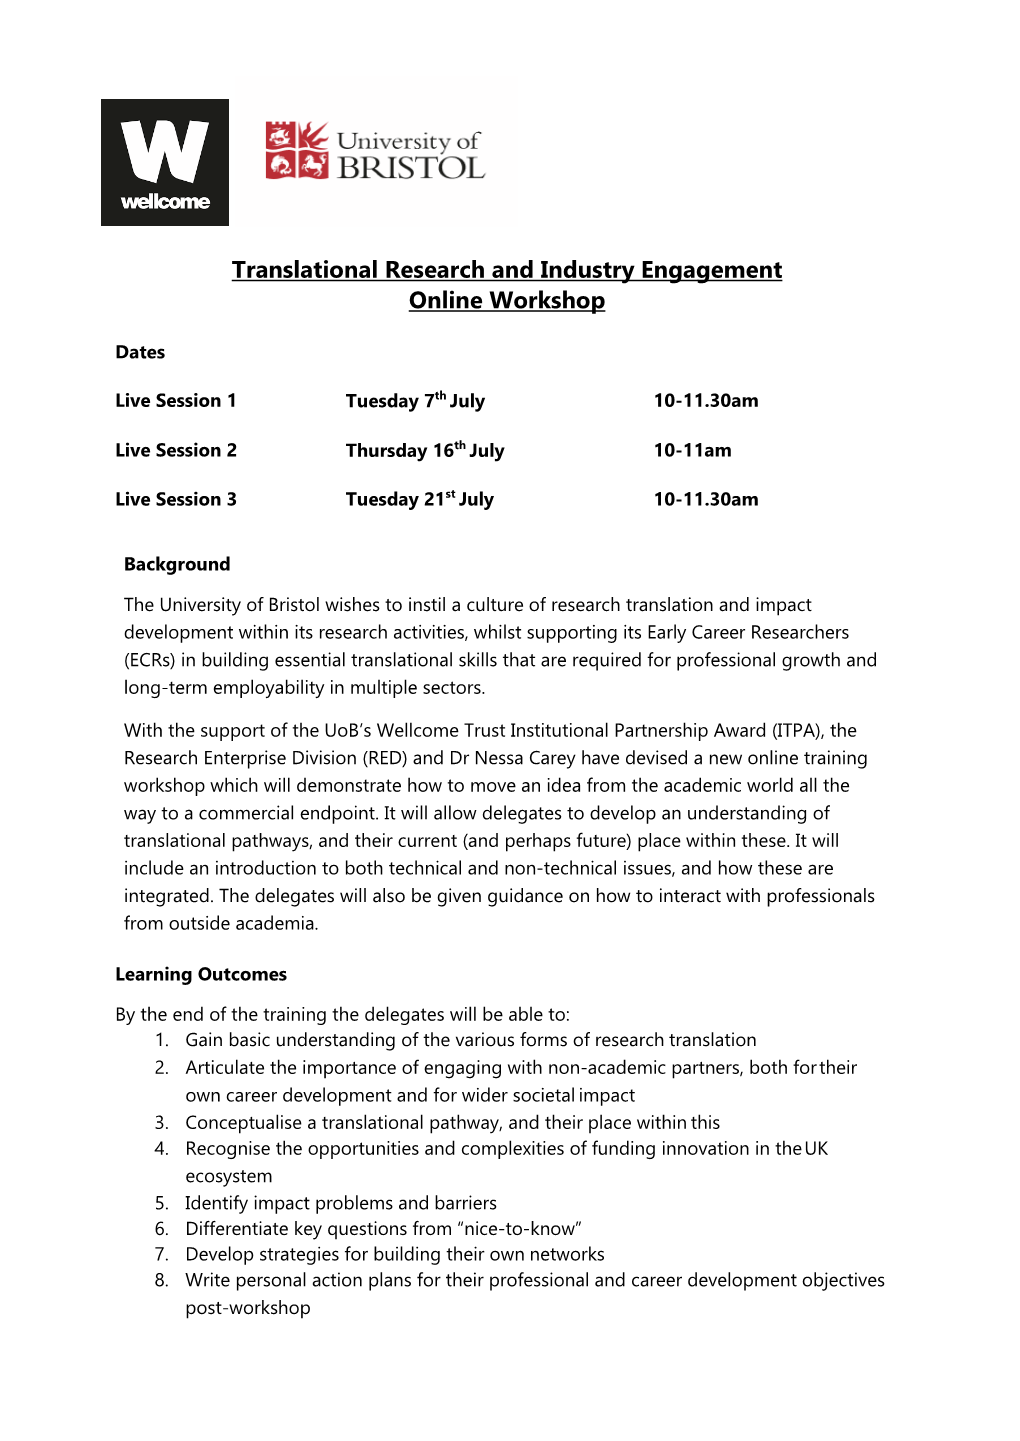 Translational Research and Industry Engagement Online Workshop